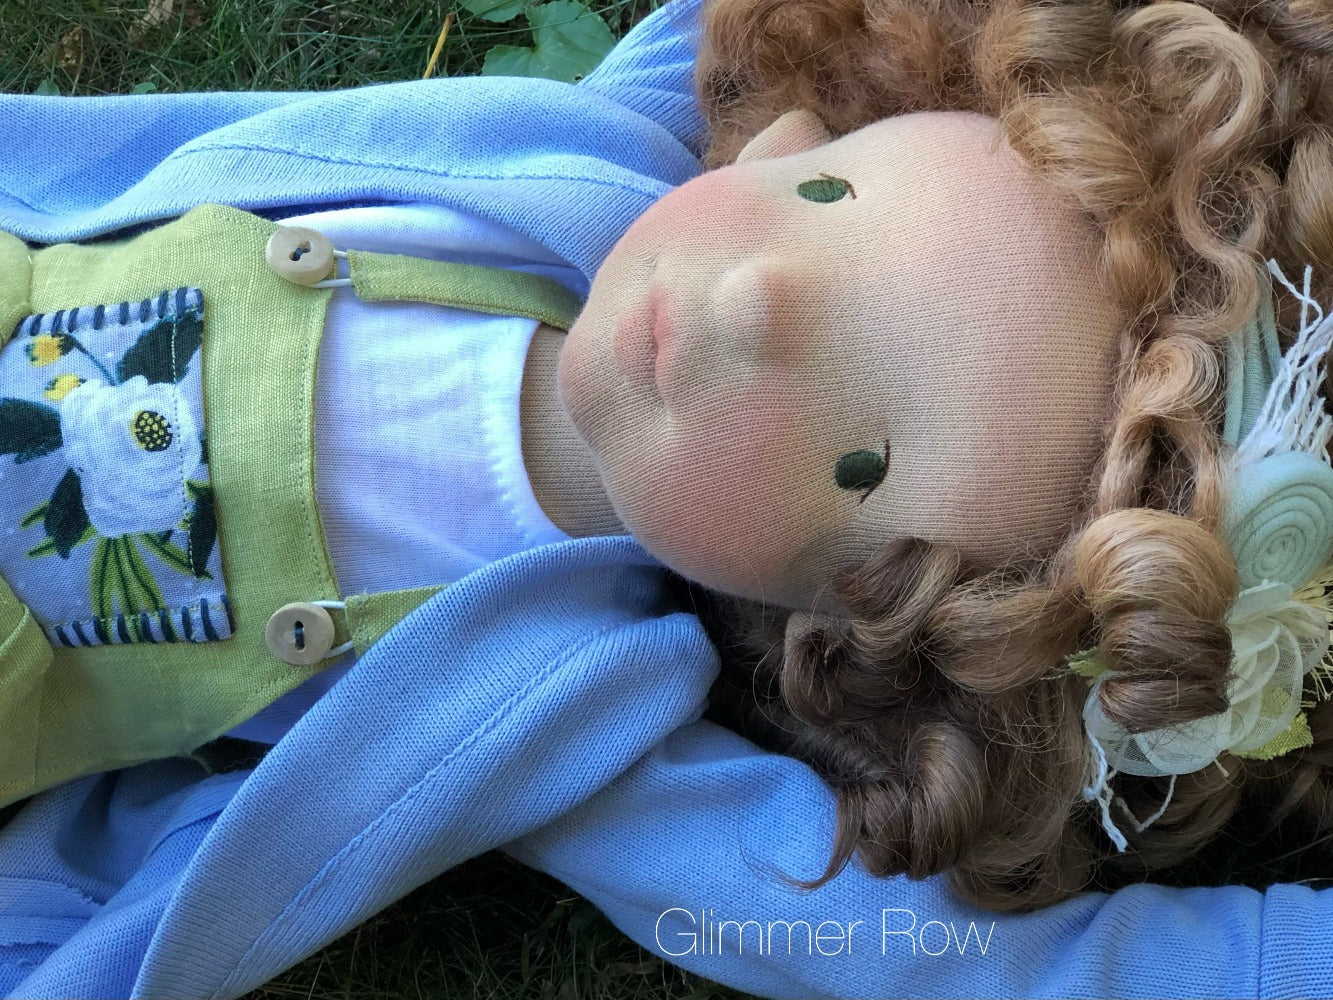 Penny- a Waldorf inspired doll